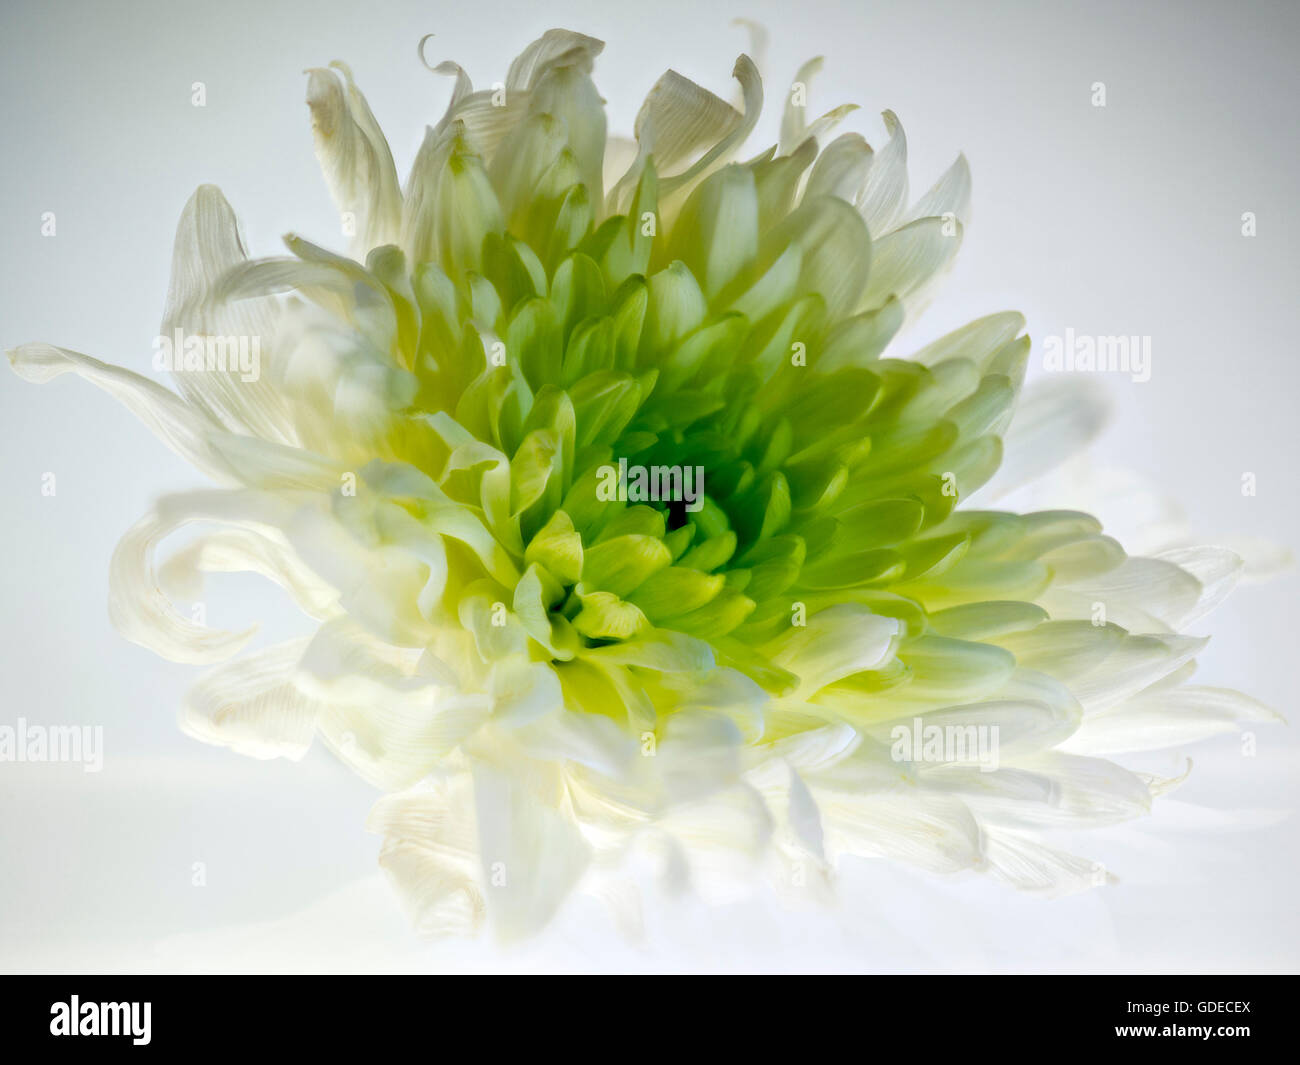 Chrysanthemum. This white/ green flower has been isolated and back lit to show its beauty and delicate petal structure. Stock Photo